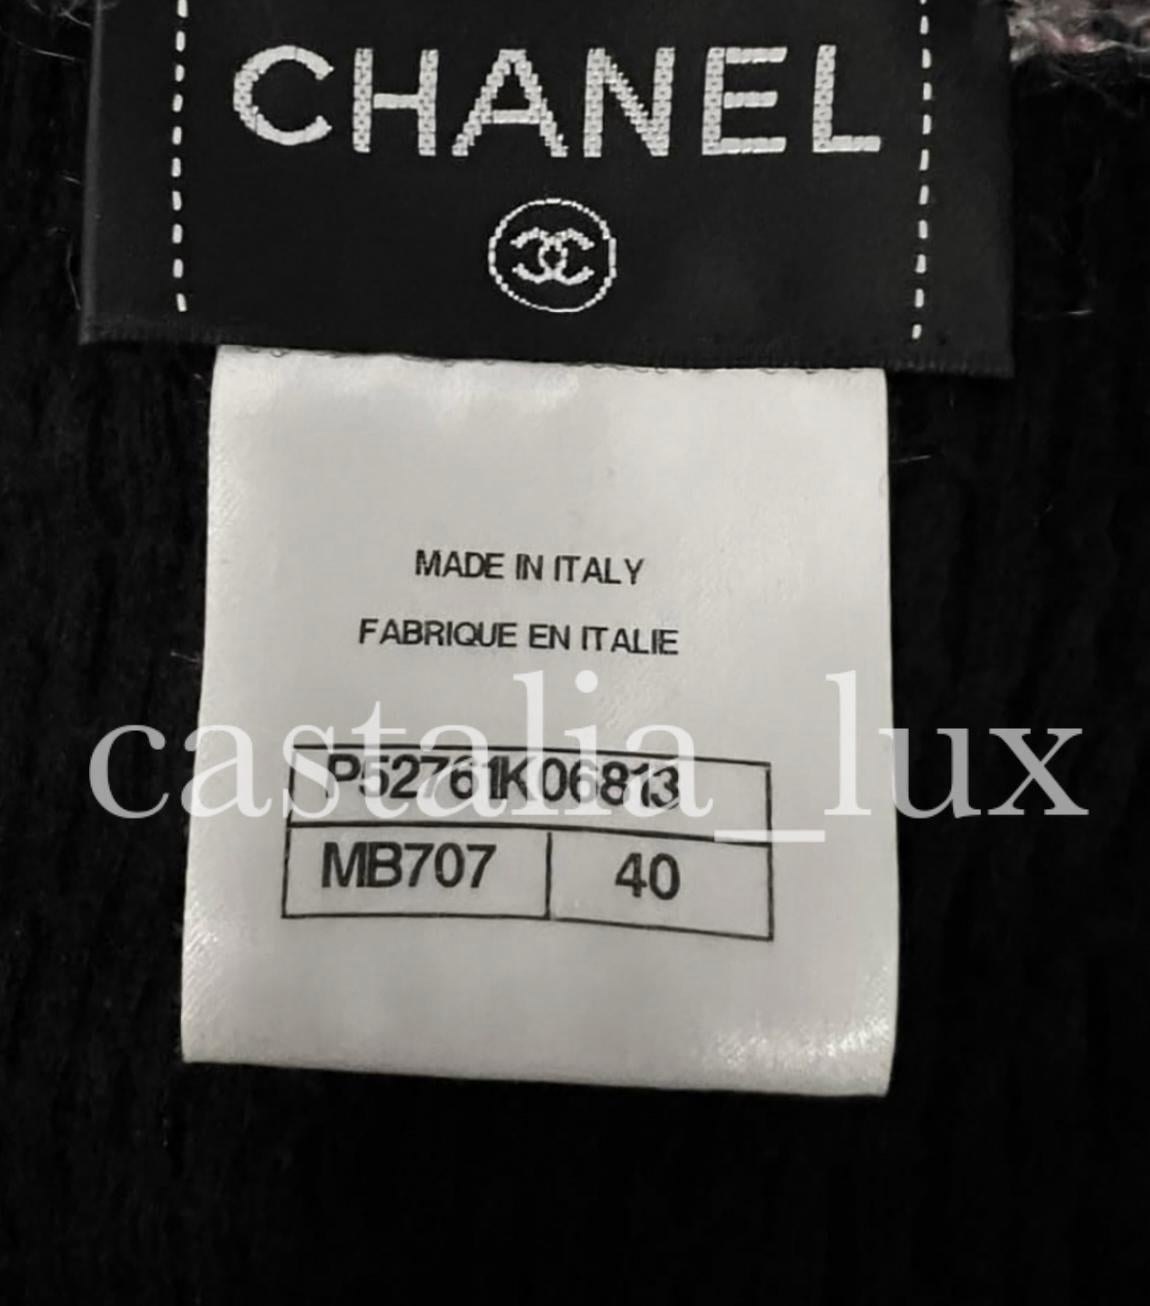 Chanel Coco Brasserie Ad Campaign Jacket Dress For Sale 10